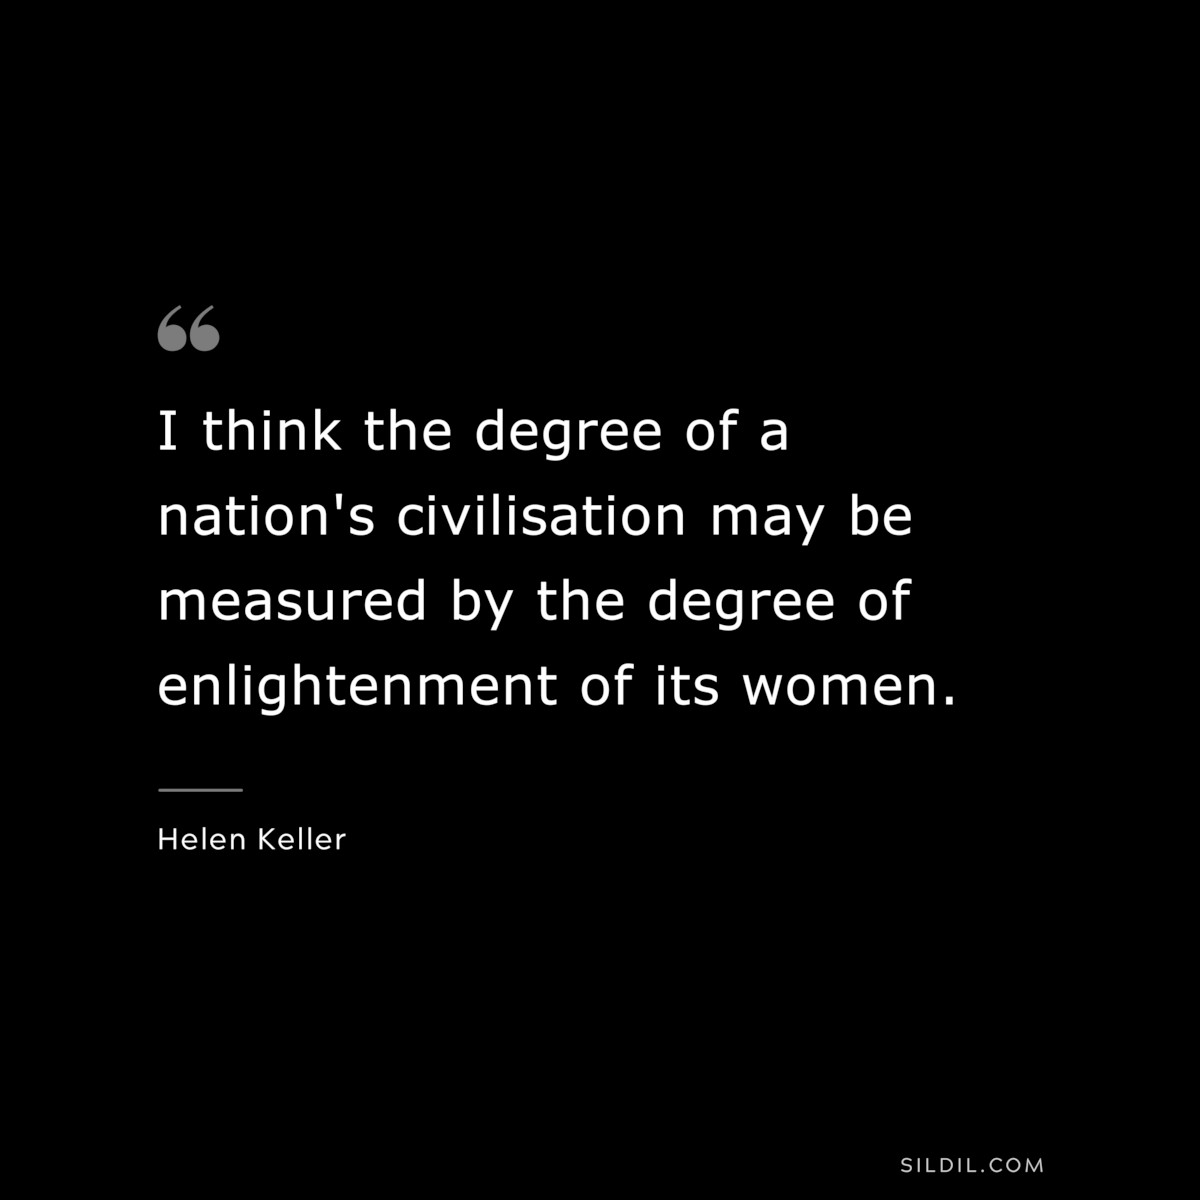 I think the degree of a nation's civilisation may be measured by the degree of enlightenment of its women. ― Helen Keller